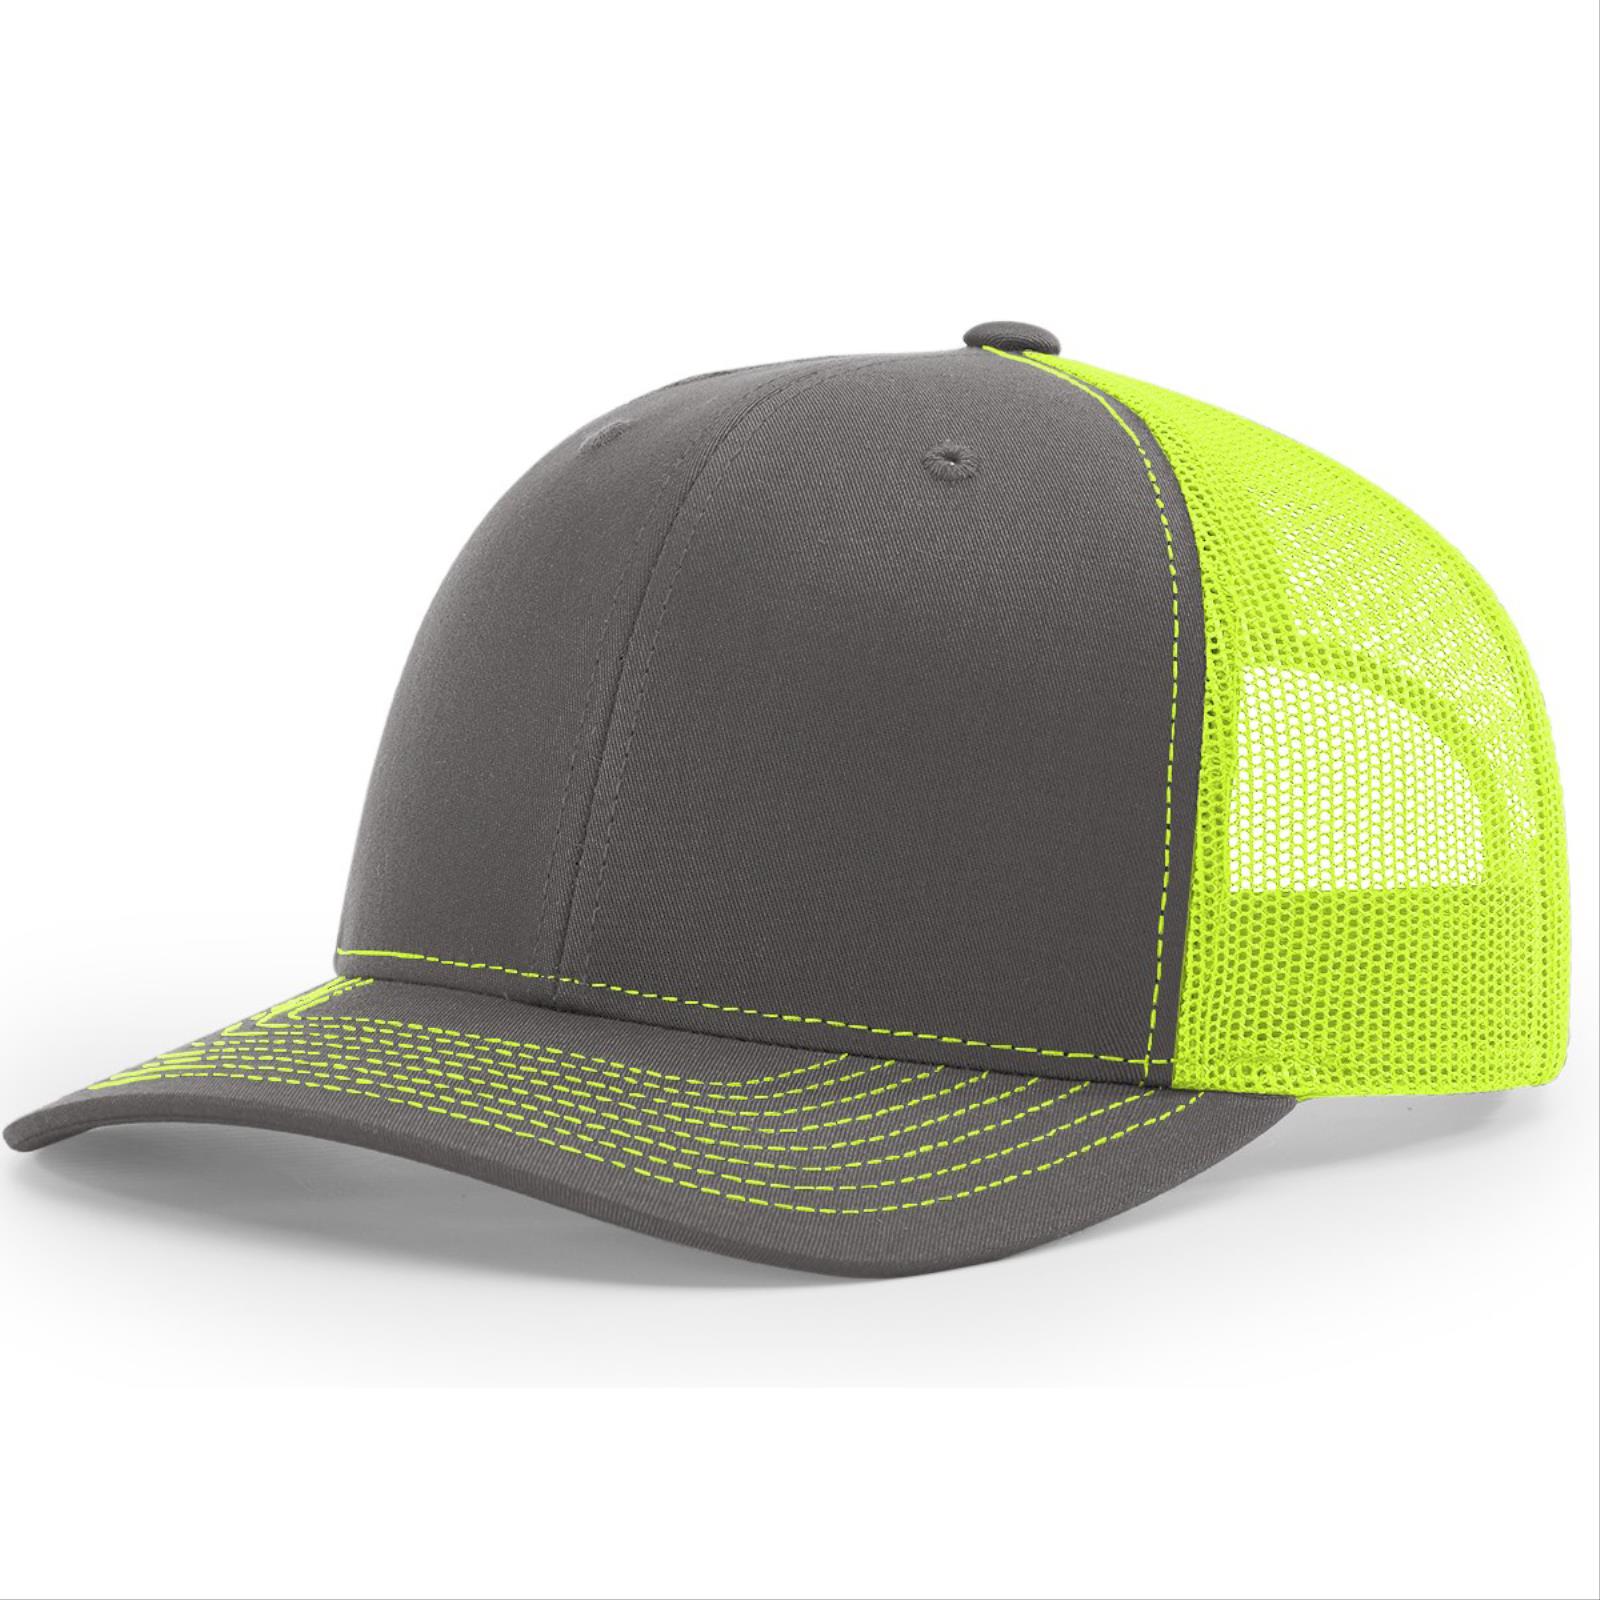 Safety Products Inc - 112 Cap, With Mesh Back